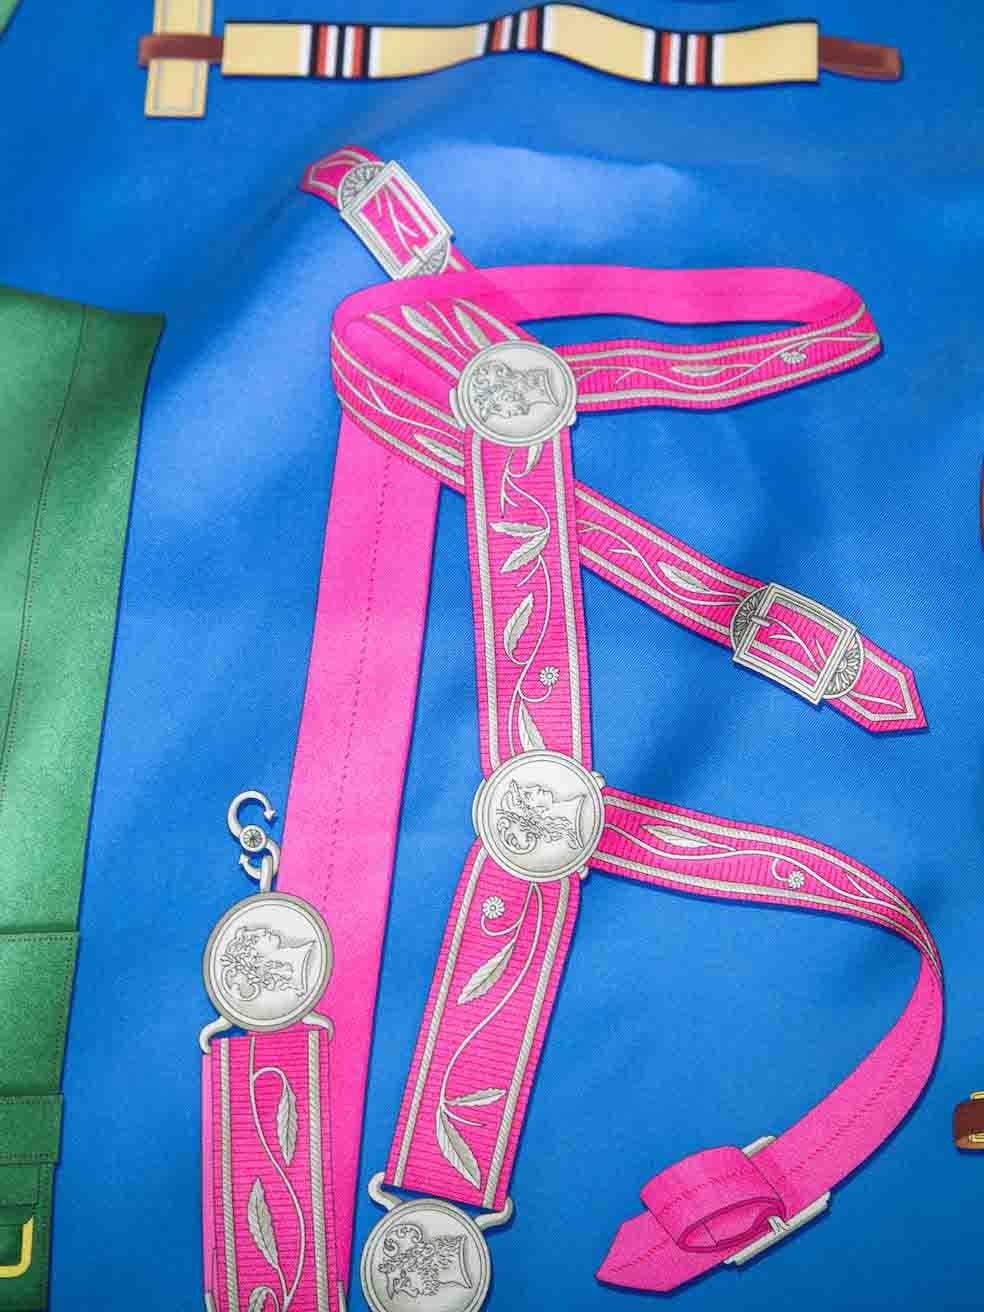 CONDITION is Never worn, with tag. No visible wear to scarf is evident on this new Hermés designer resale item. This item comes in original box.
 
 
 
 Details
 
 
 Blue
 
 Silk
 
 Square scarf
 
 Lettres Equestre print
 
 
 
 
 
 Made in France
 
